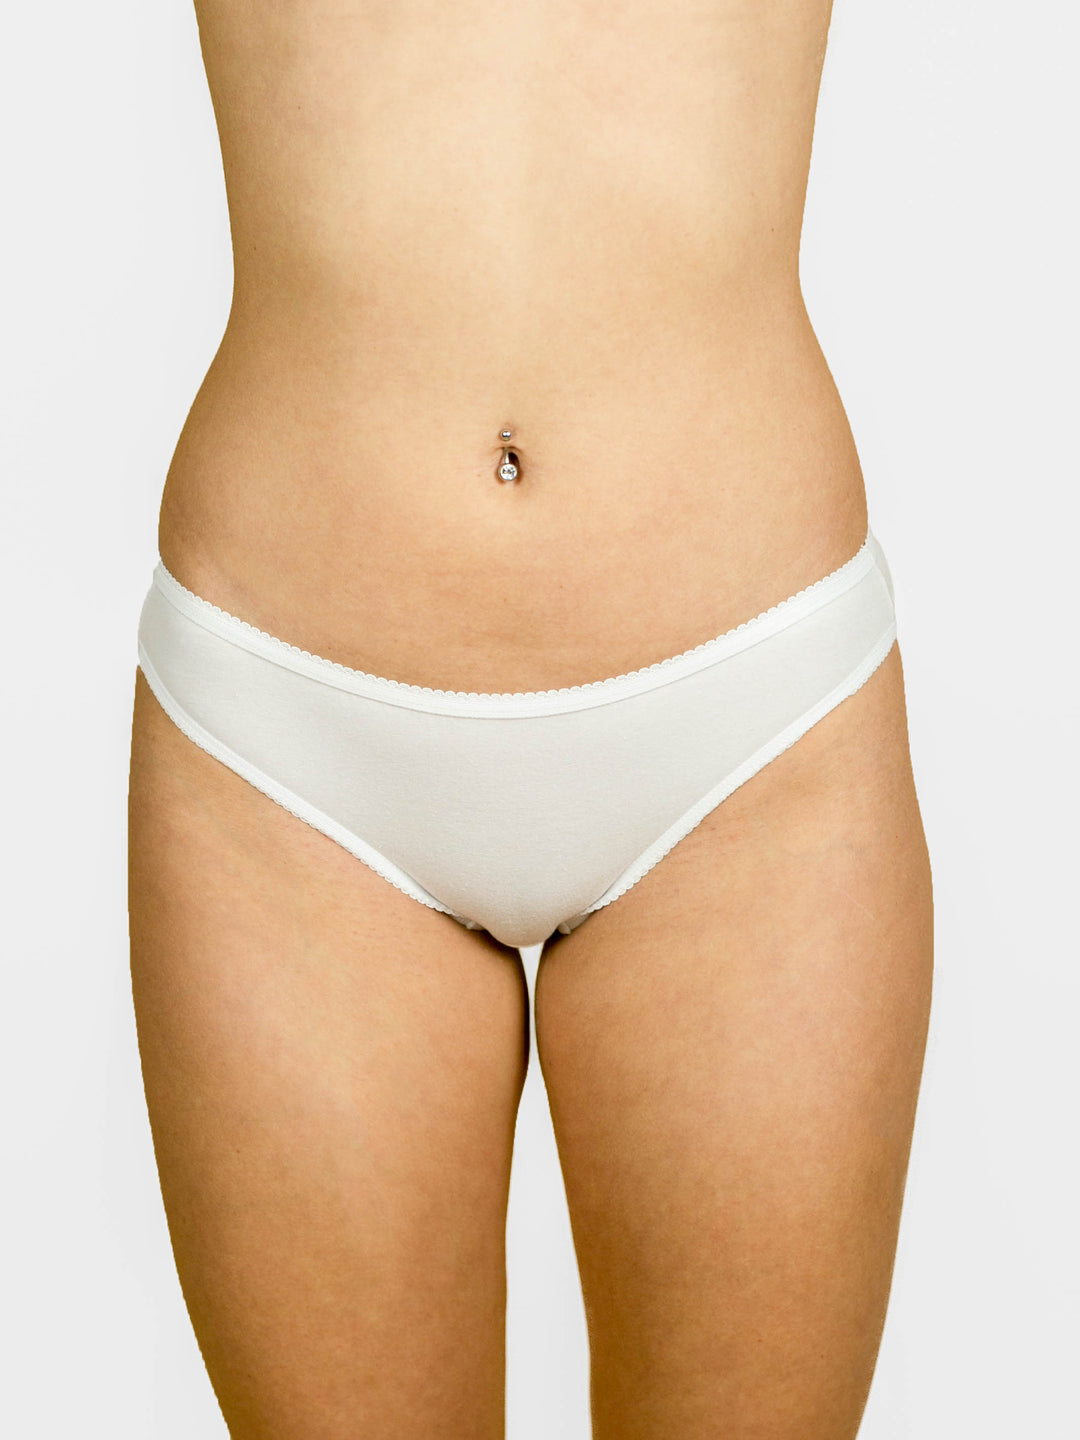 Middle waist simple cotton panty - White - (520-white) – Diana's Lingerie